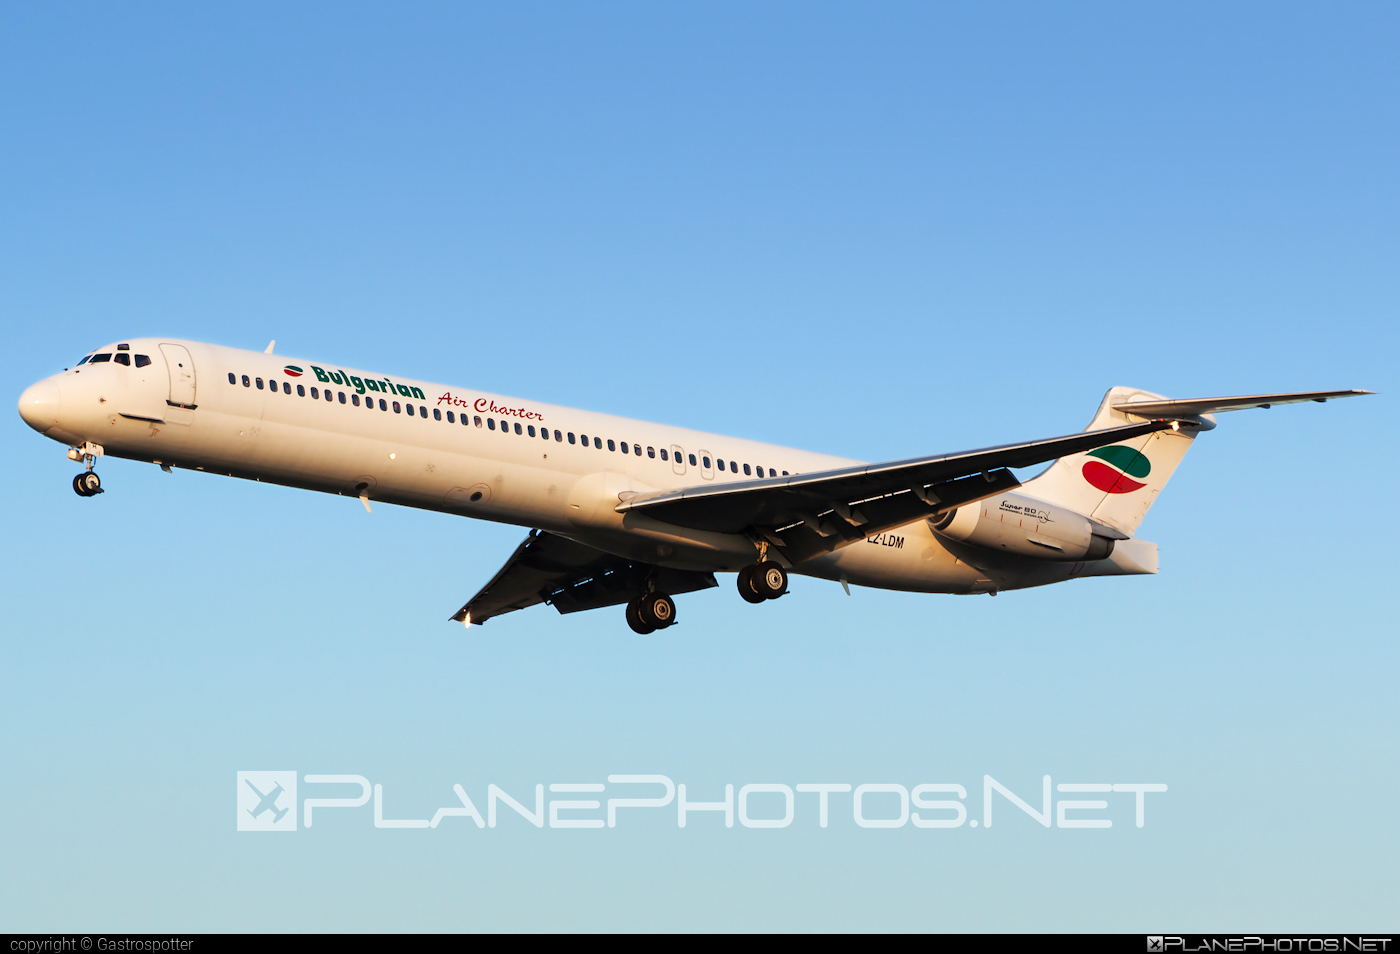 McDonnell Douglas MD-82 - LZ-LDM operated by Bulgarian Air Charter #bulgarianaircharter #mcDonnellDouglas #mcdonnelldouglas80 #mcdonnelldouglas82 #mcdonnelldouglasmd80 #mcdonnelldouglasmd82 #md80 #md82